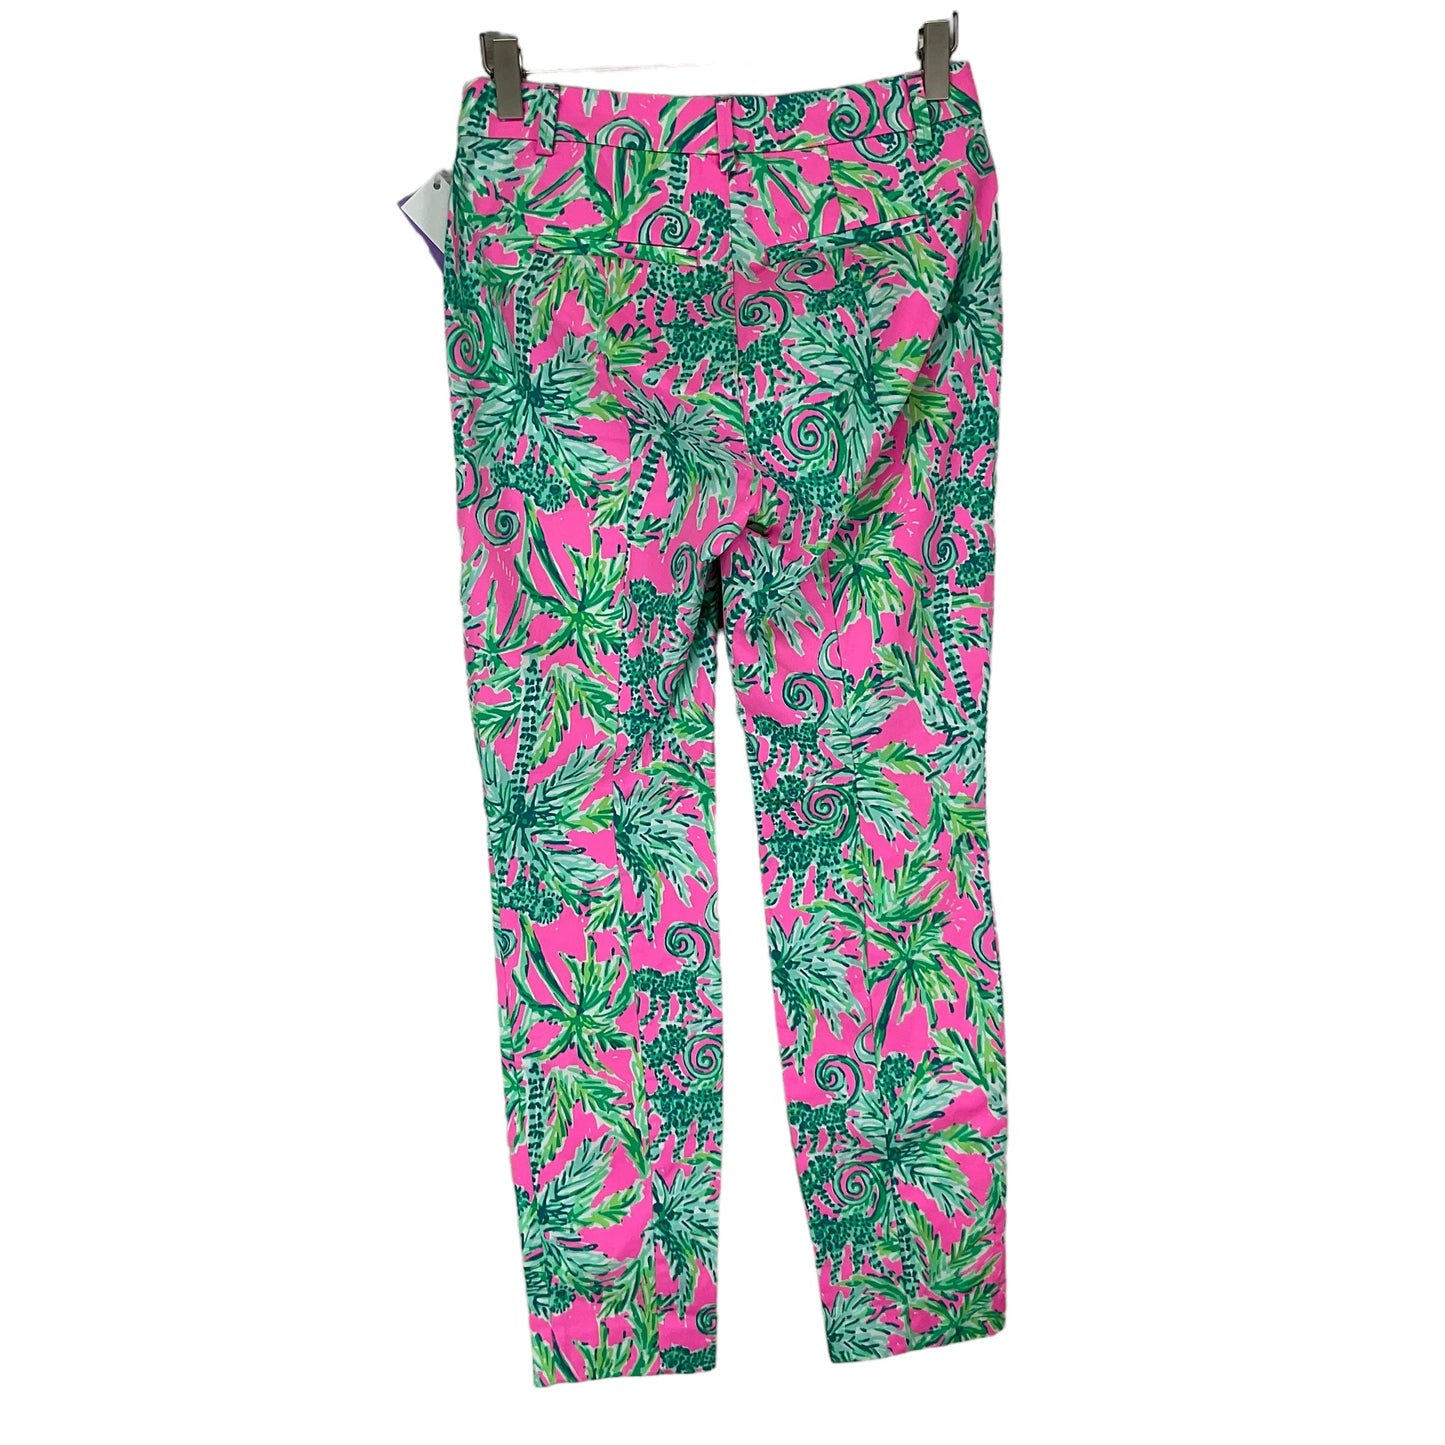 Green & Pink Pants Designer Lilly Pulitzer, Size 0